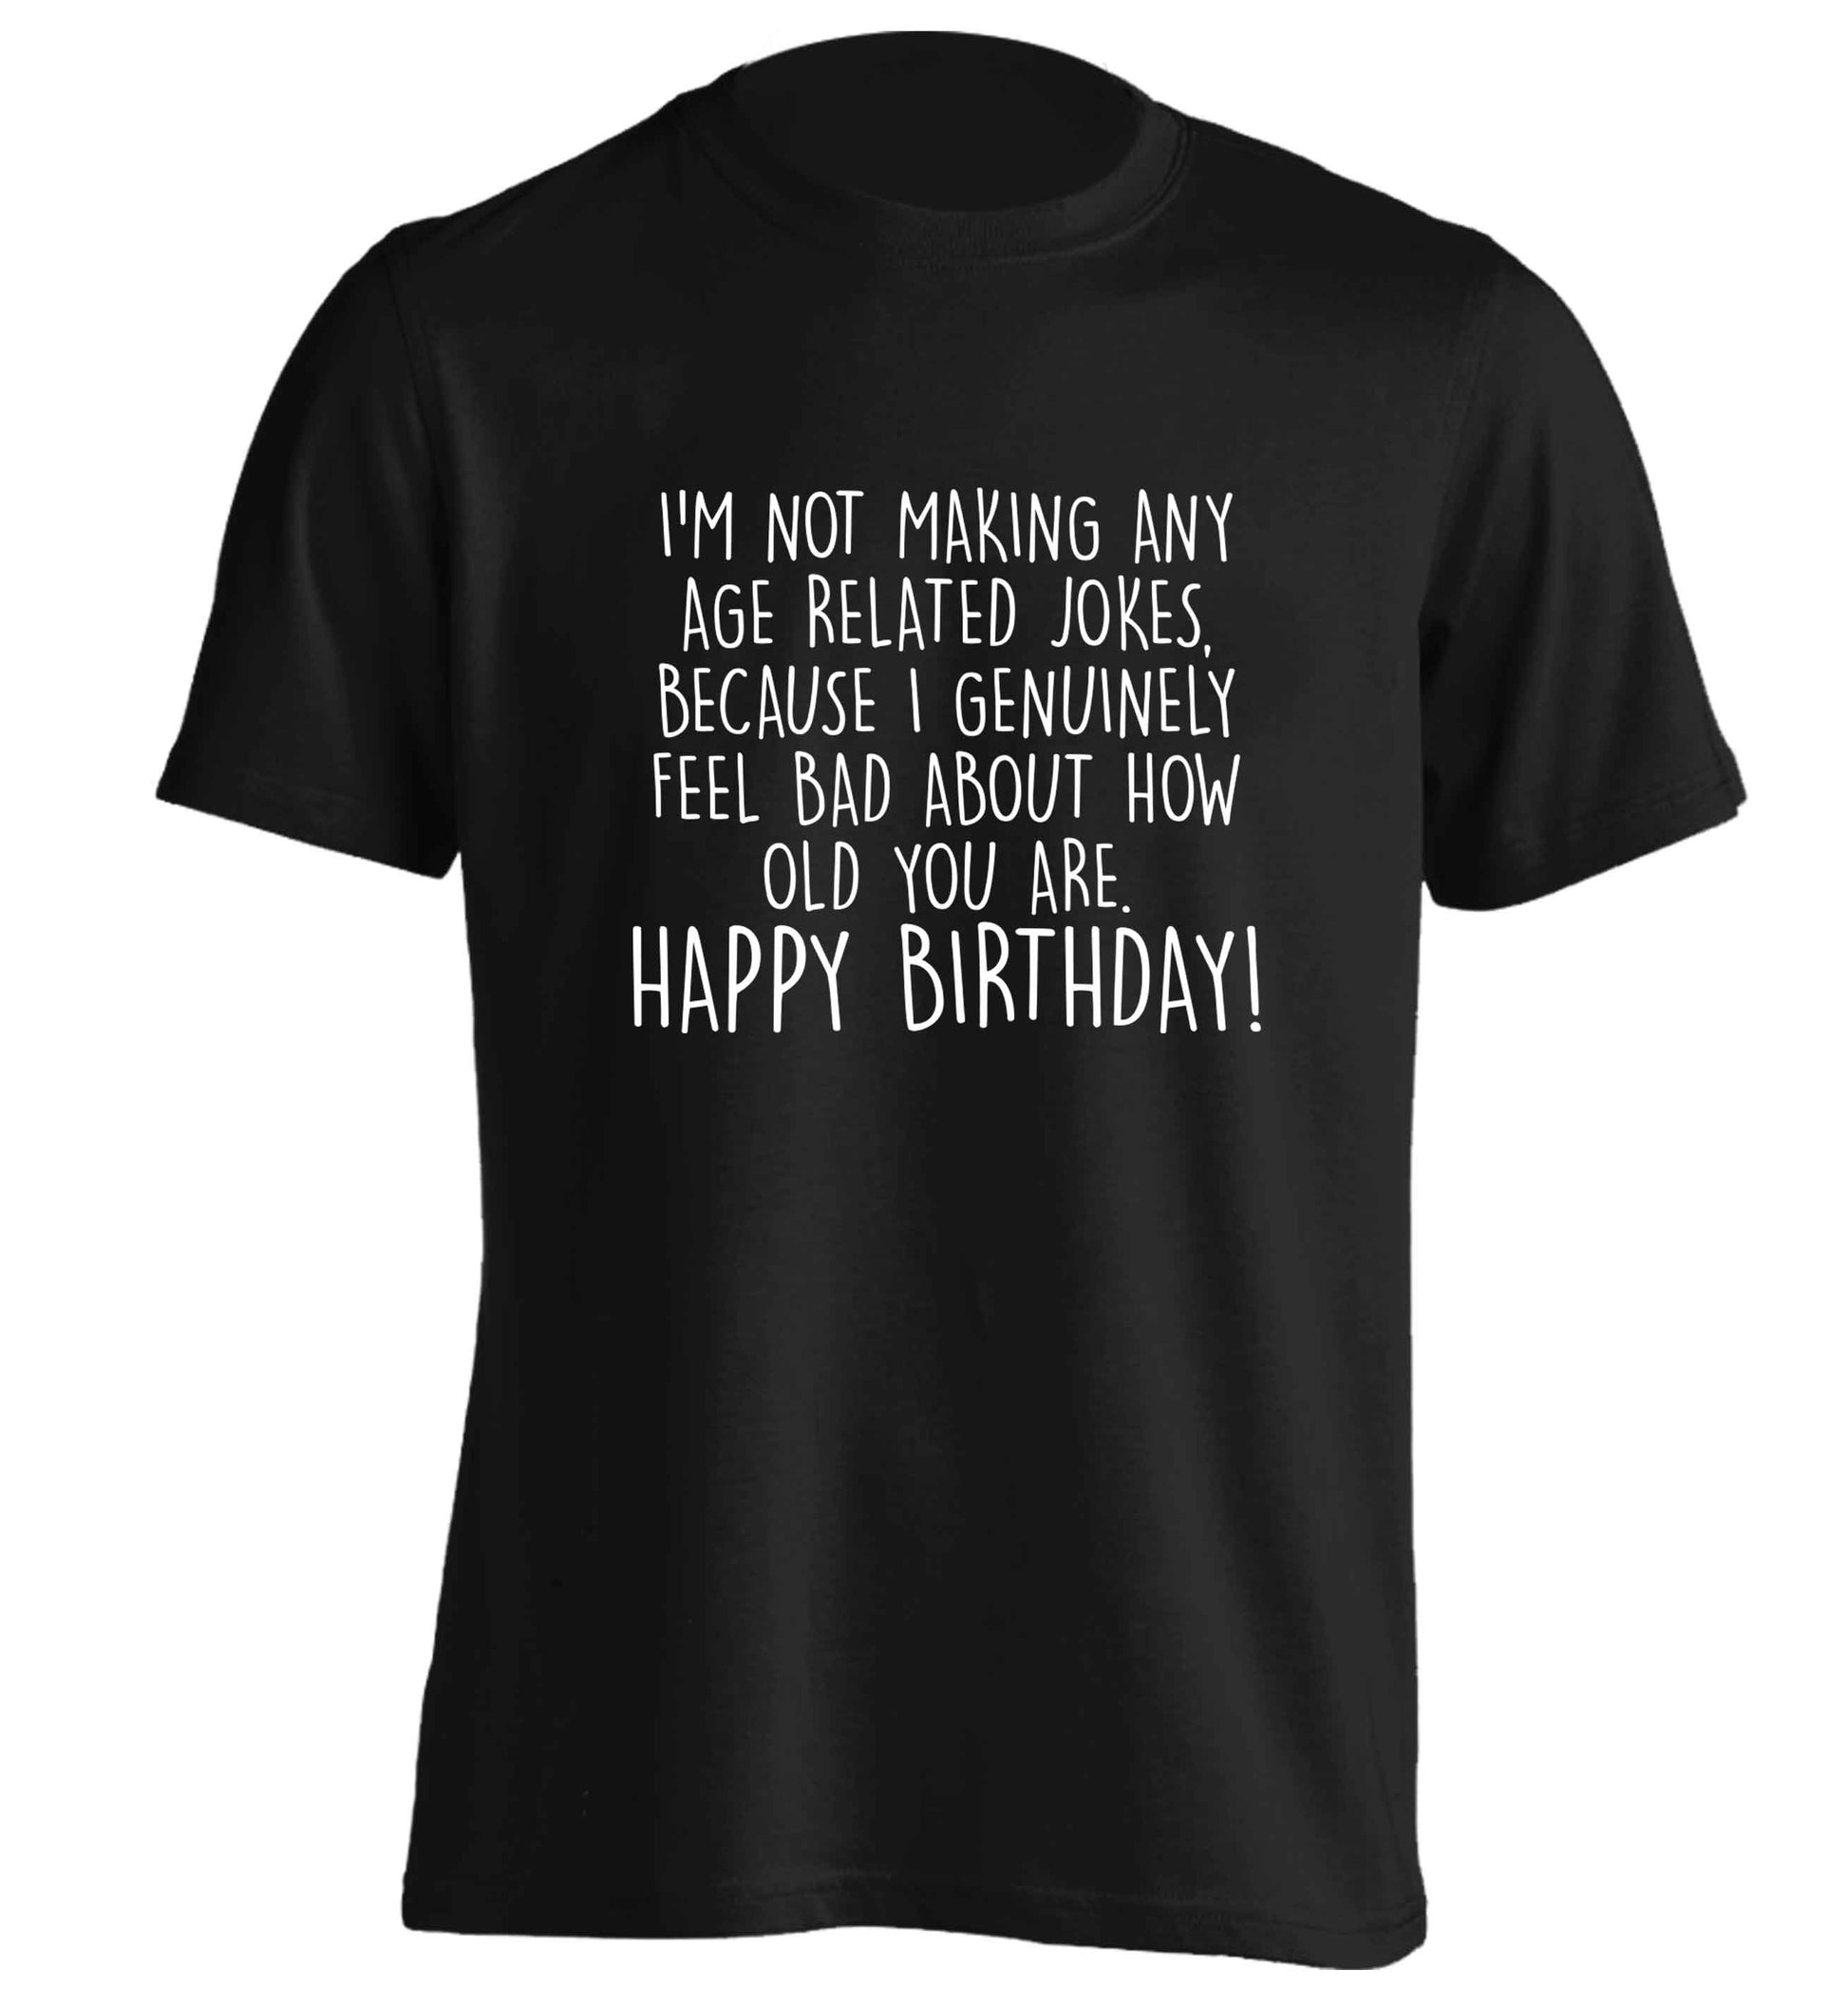 I'm not making any age related jokes because I genuinely feel bad for how old you are adults unisex black Tshirt 2XL